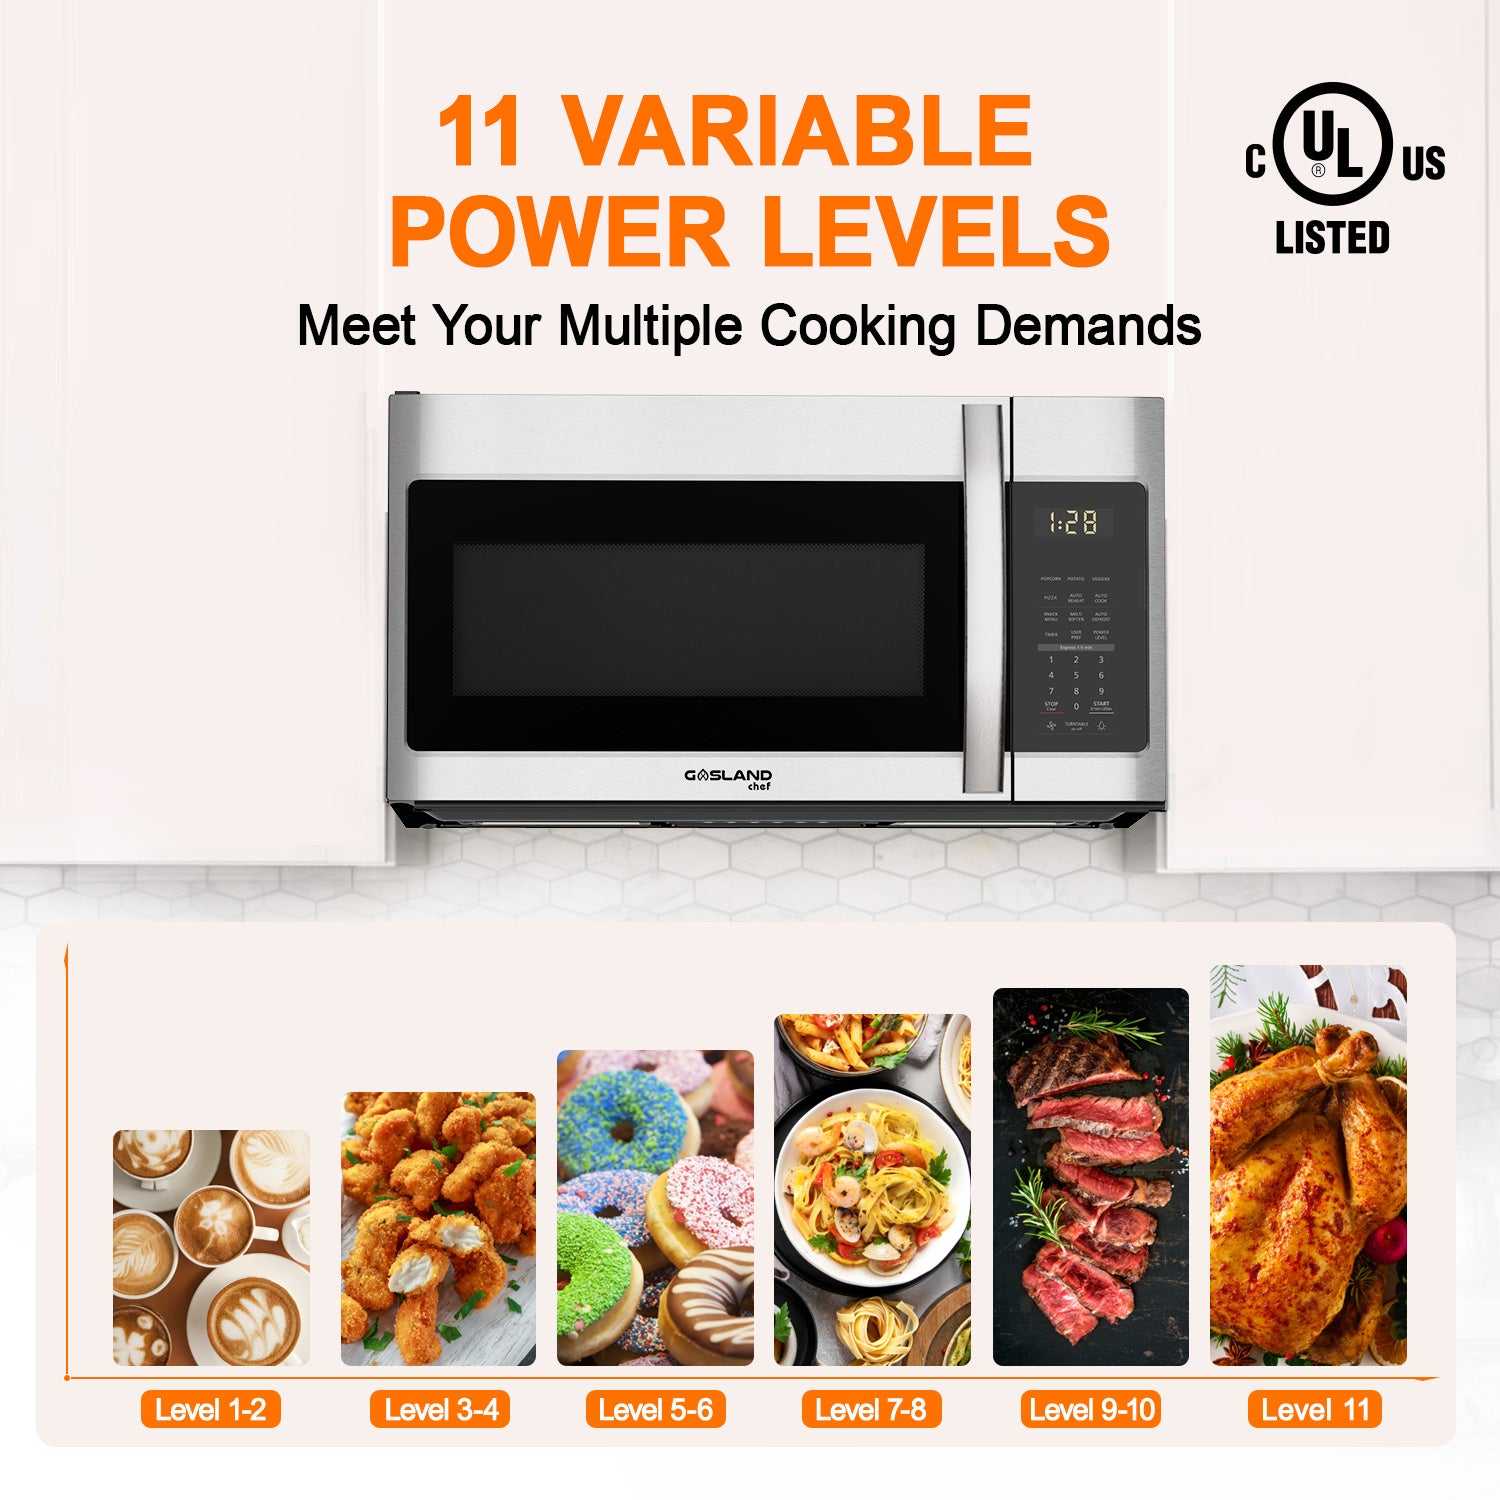 Gasland Chef Gasland 30 Inch Over the Range Microwave Oven with 1.9 Cu. Ft. Capacity, 1000 Watts, 300 CFM Exhaust Fan and LED Light, 13.5" Glass Turntable, Silver